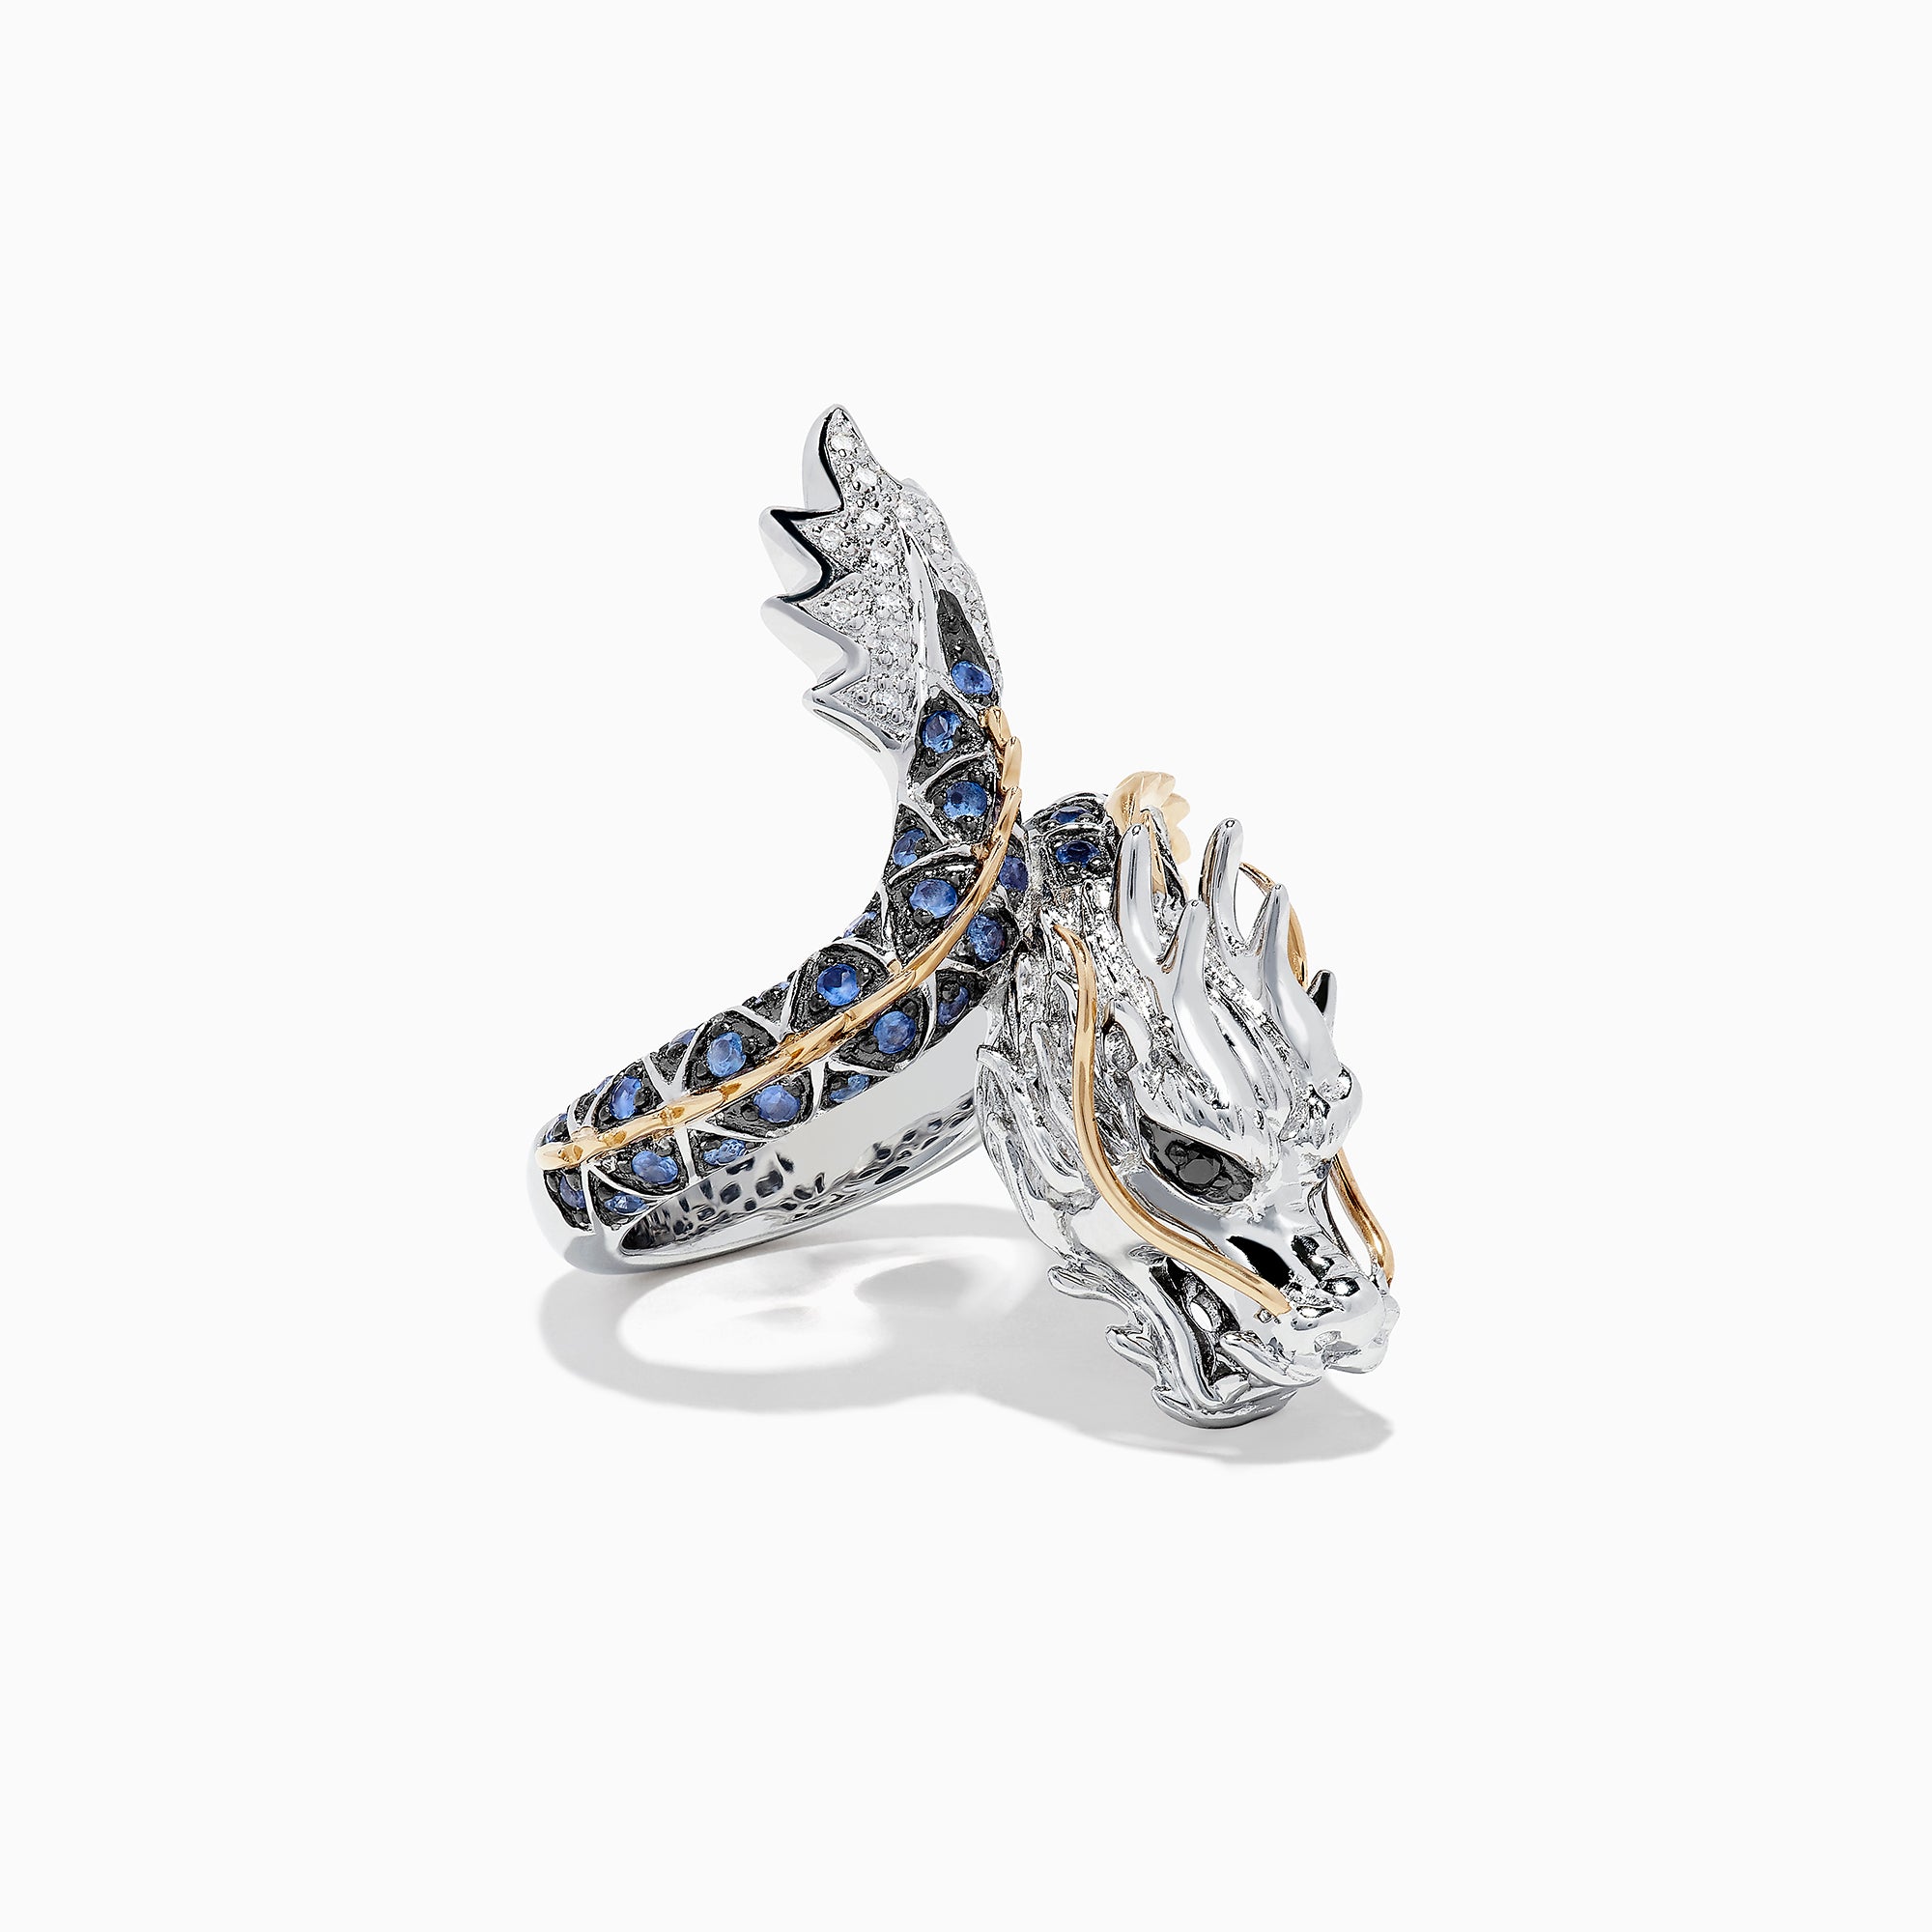 Effy Safari Sterling Silver and 14K Gold Sapphire Dragon Ring, 0.79 TCW